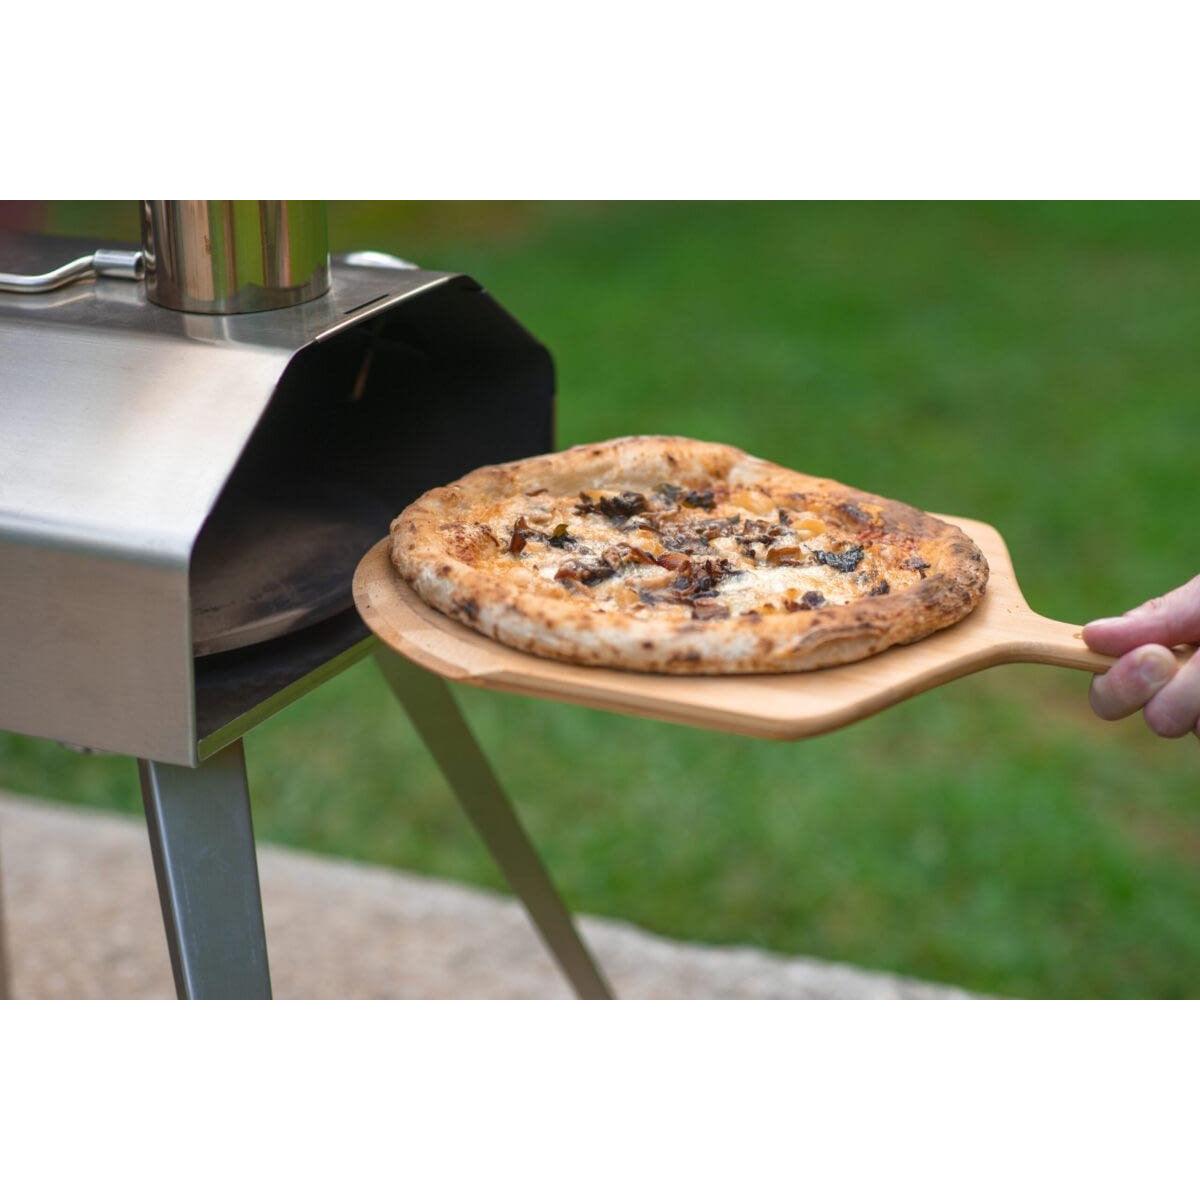 Qubestove Rotating Pizza Oven and Stove - Stainless Steel | 007159 from DID Electrical - guaranteed Irish, guaranteed quality service. (6977626439868)